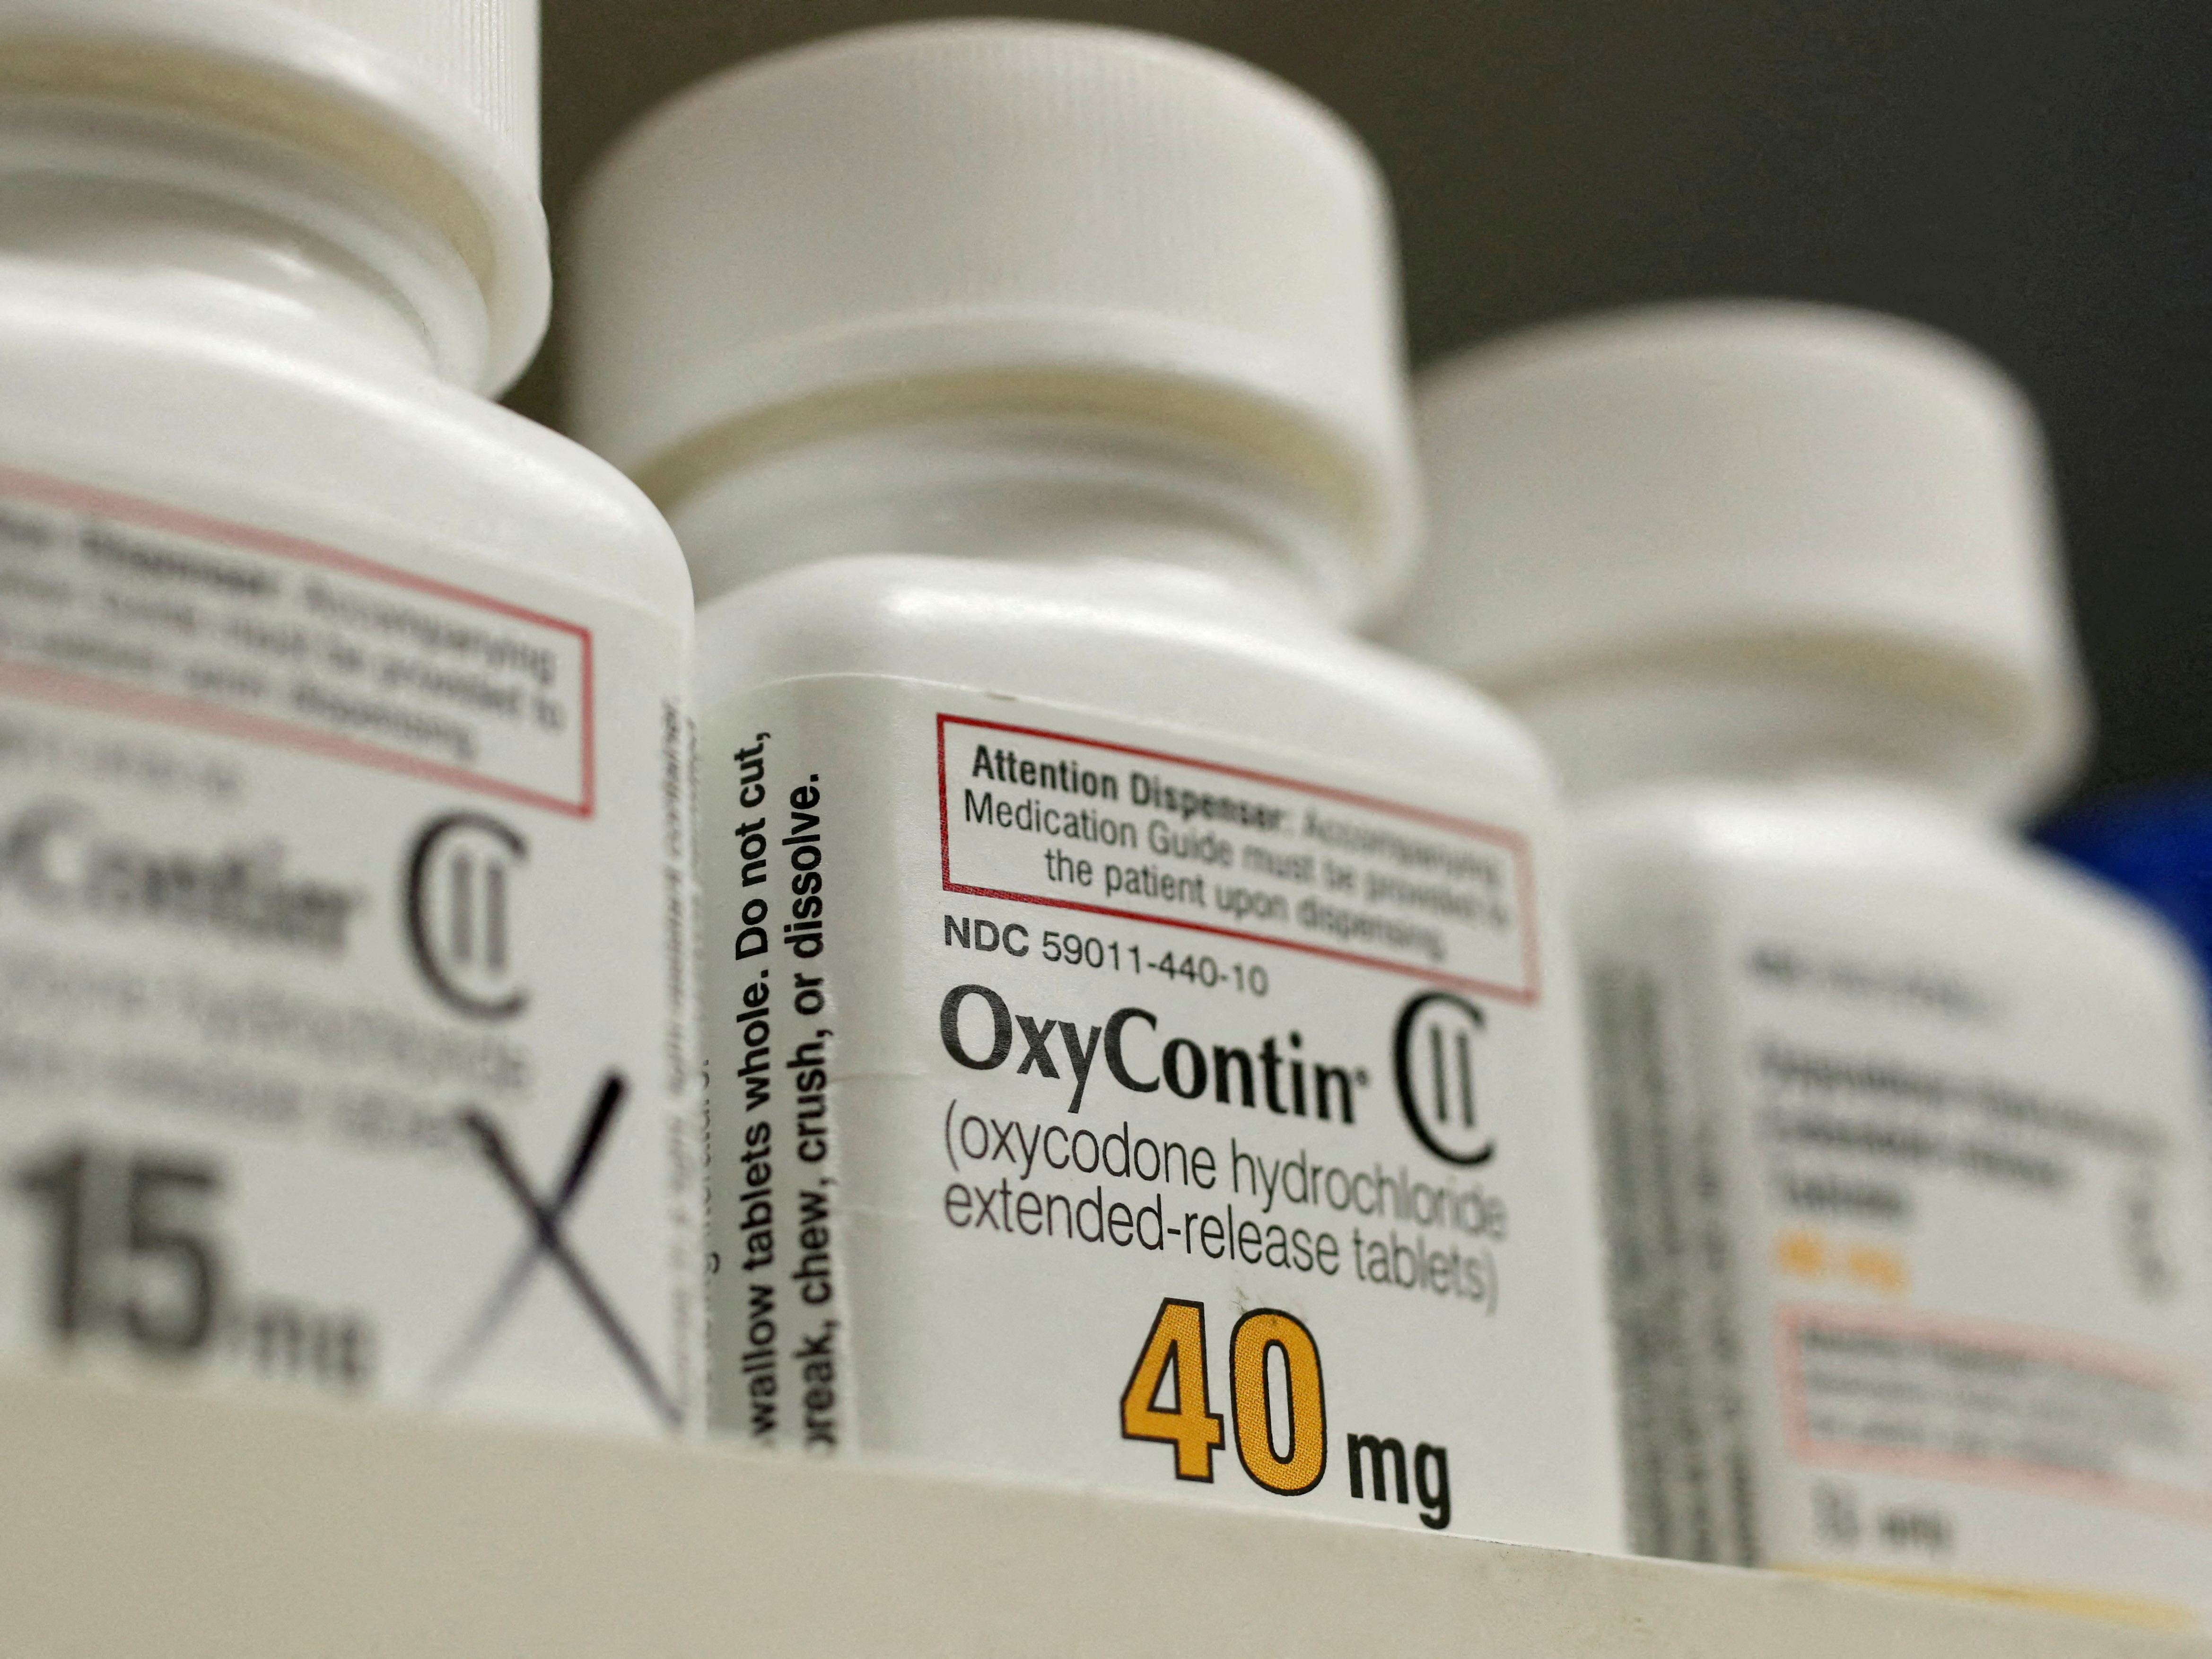 Bottles of prescription painkiller OxyContin, 40mg pills, made by Purdue Pharma L.D. sit on a shelf at a local pharmacy in Provo